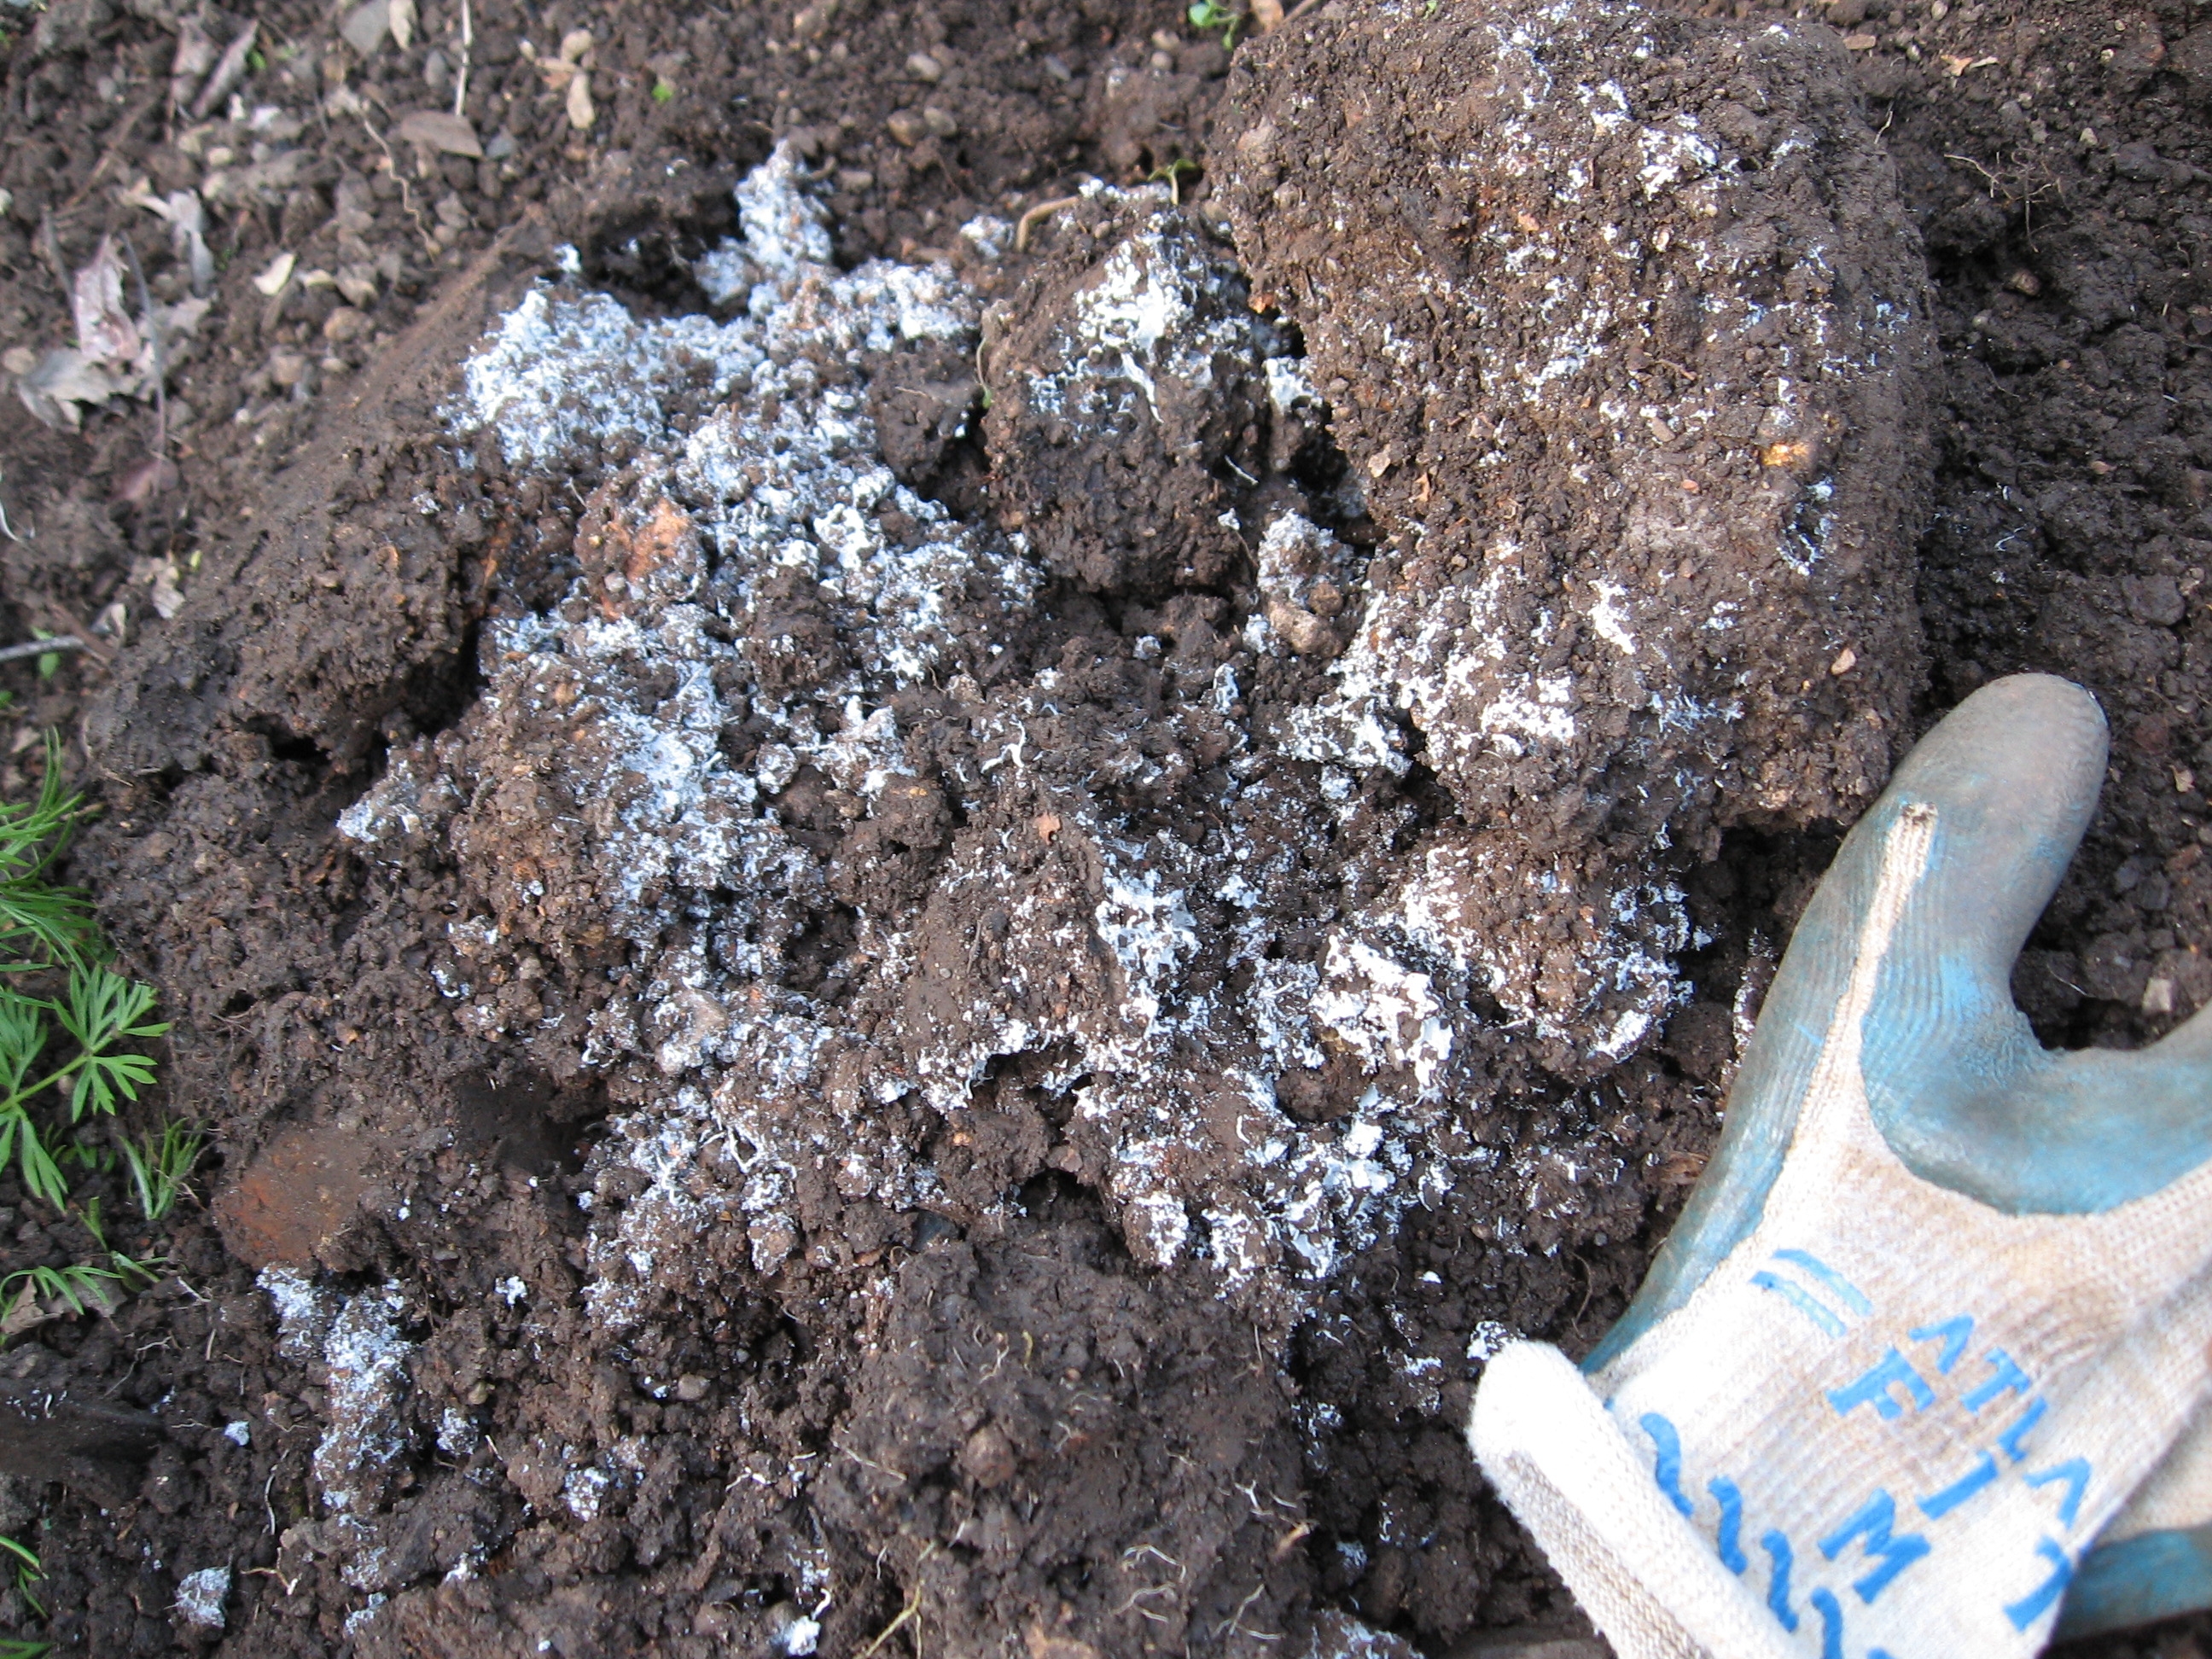 8 Images How To Get Rid Of Mold In Garden Soil And View